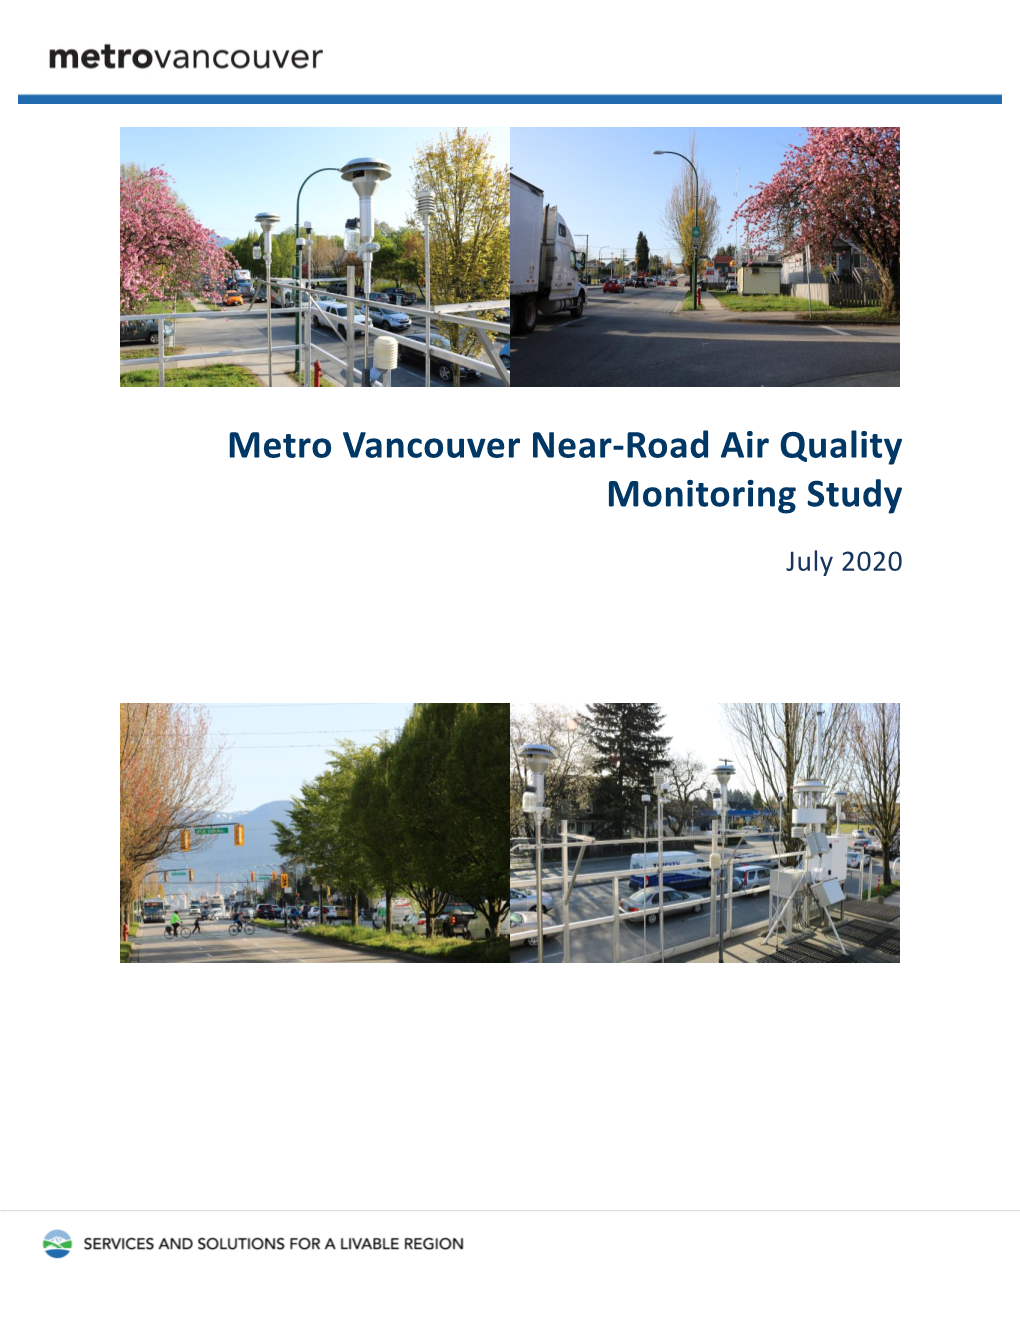 Metro Vancouver Near-Road Air Quality Monitoring Study